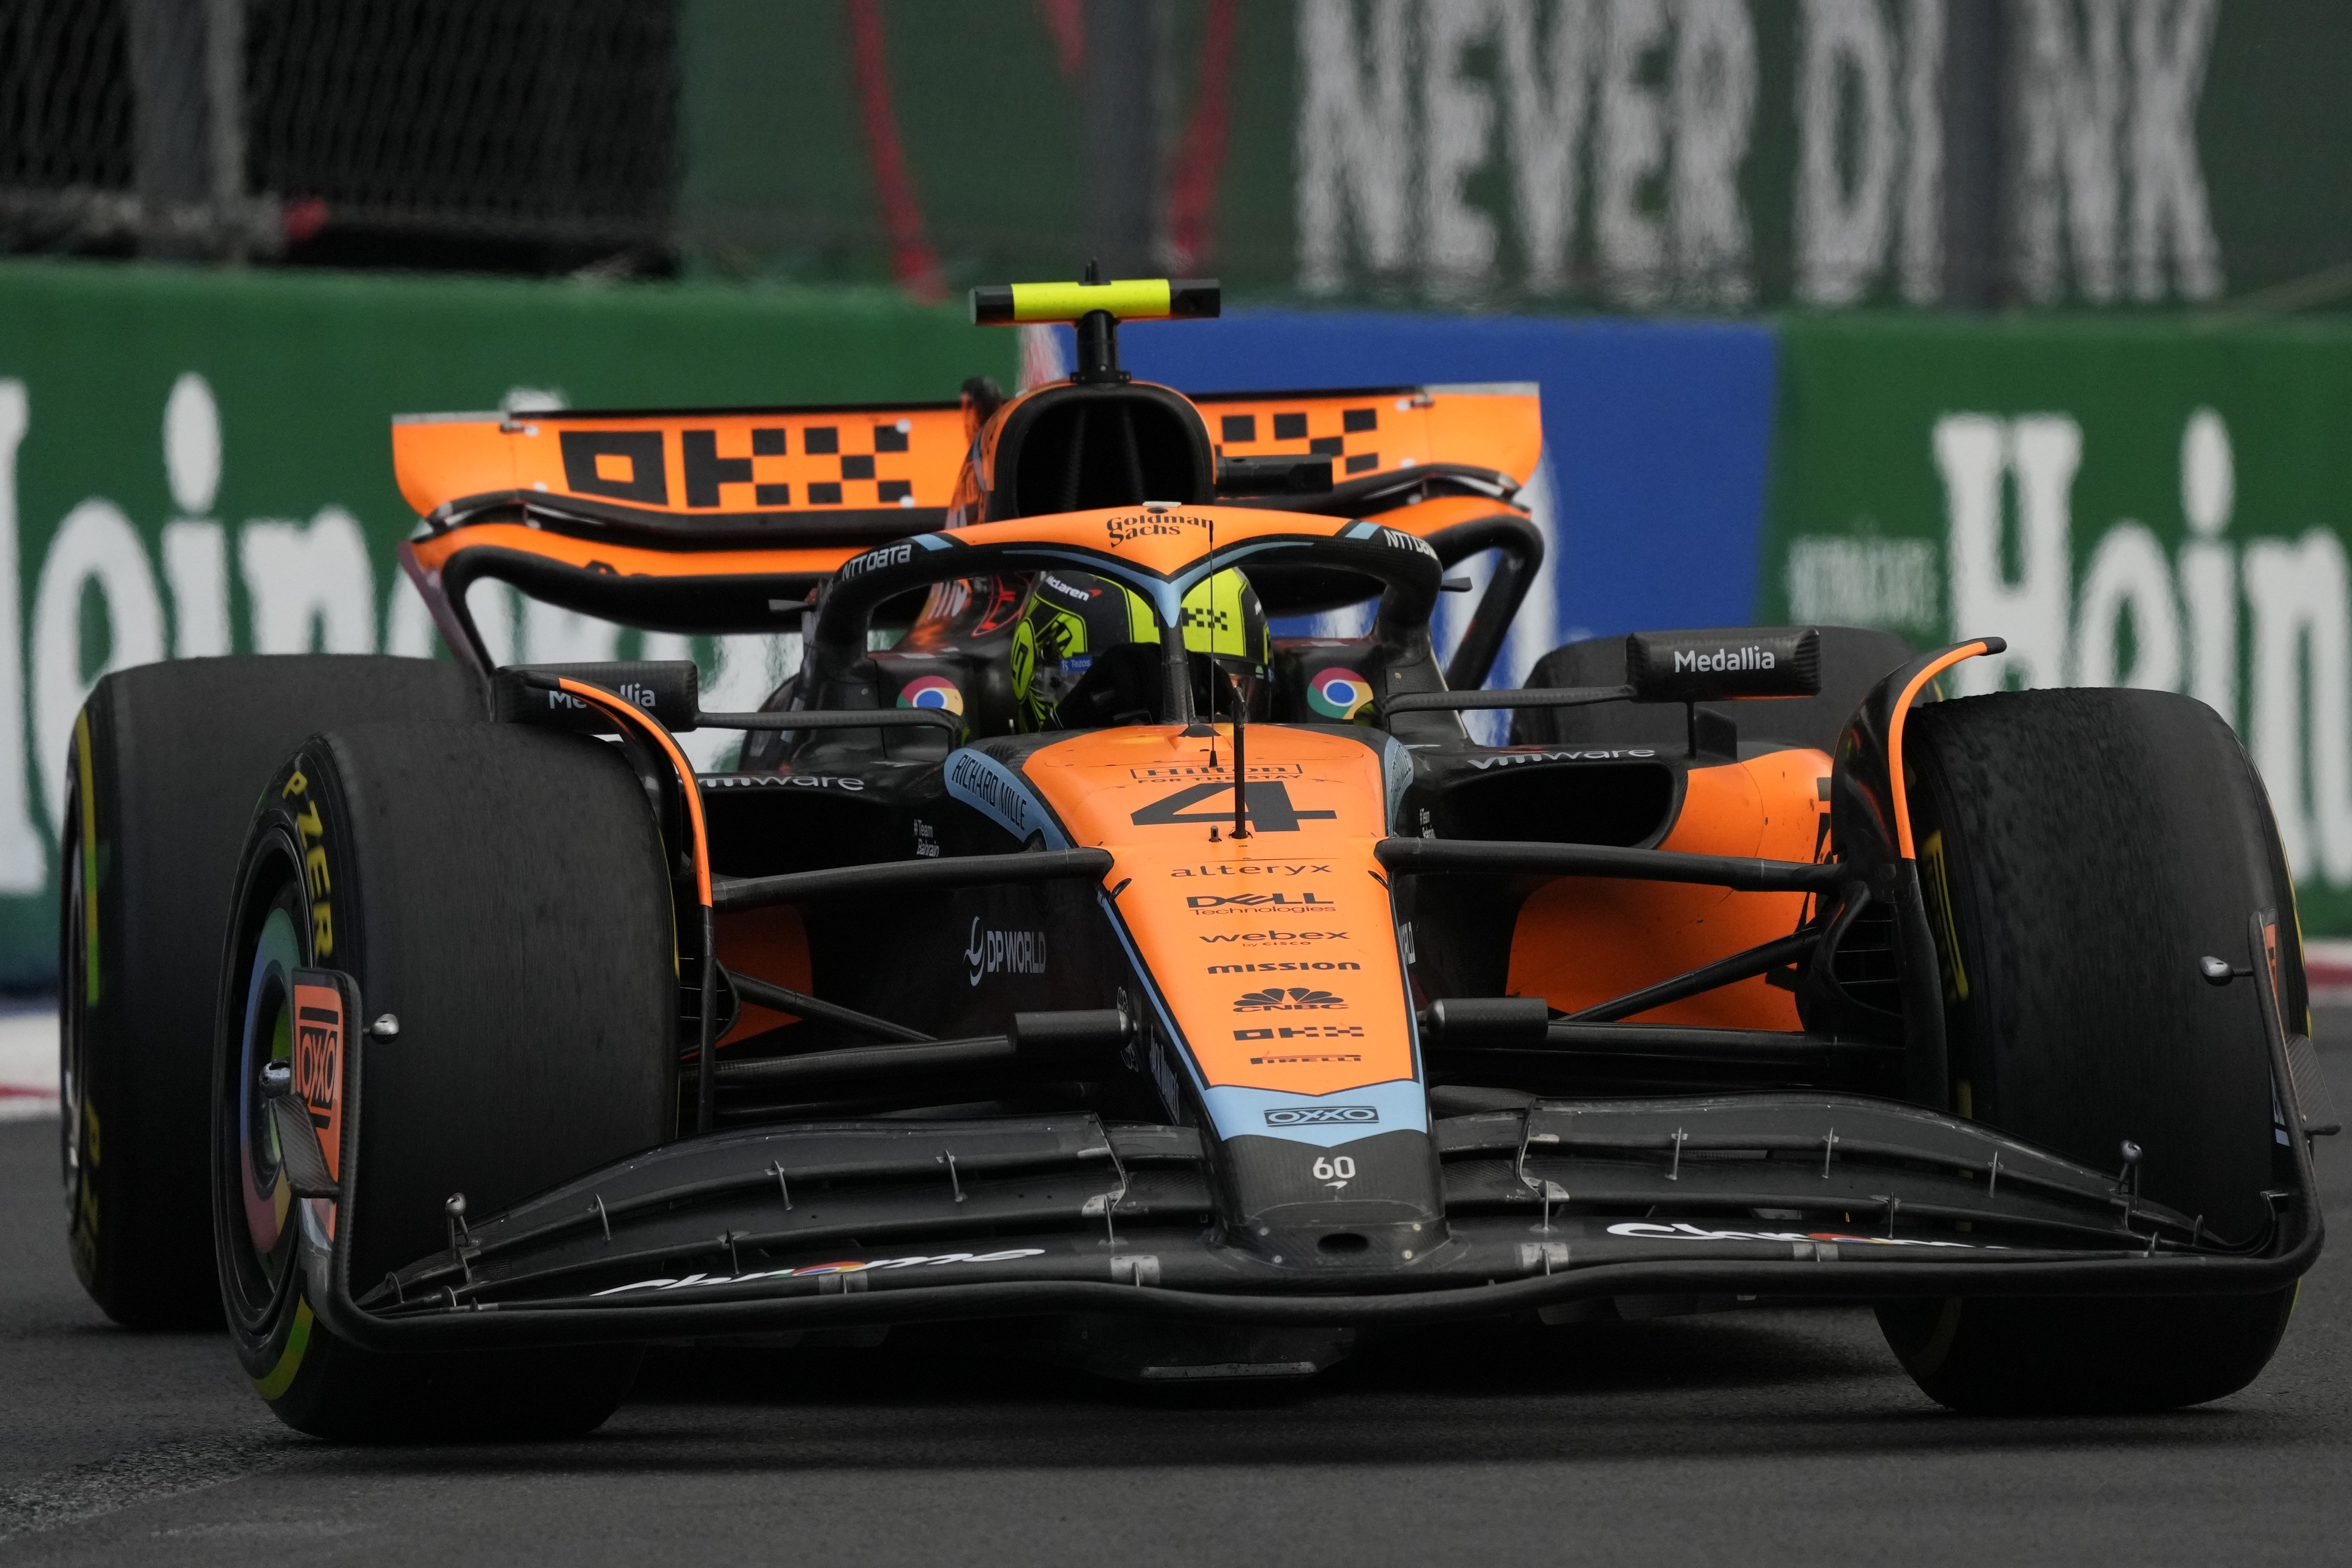 McLaren driver Lando Norris will start from 19th on the grid